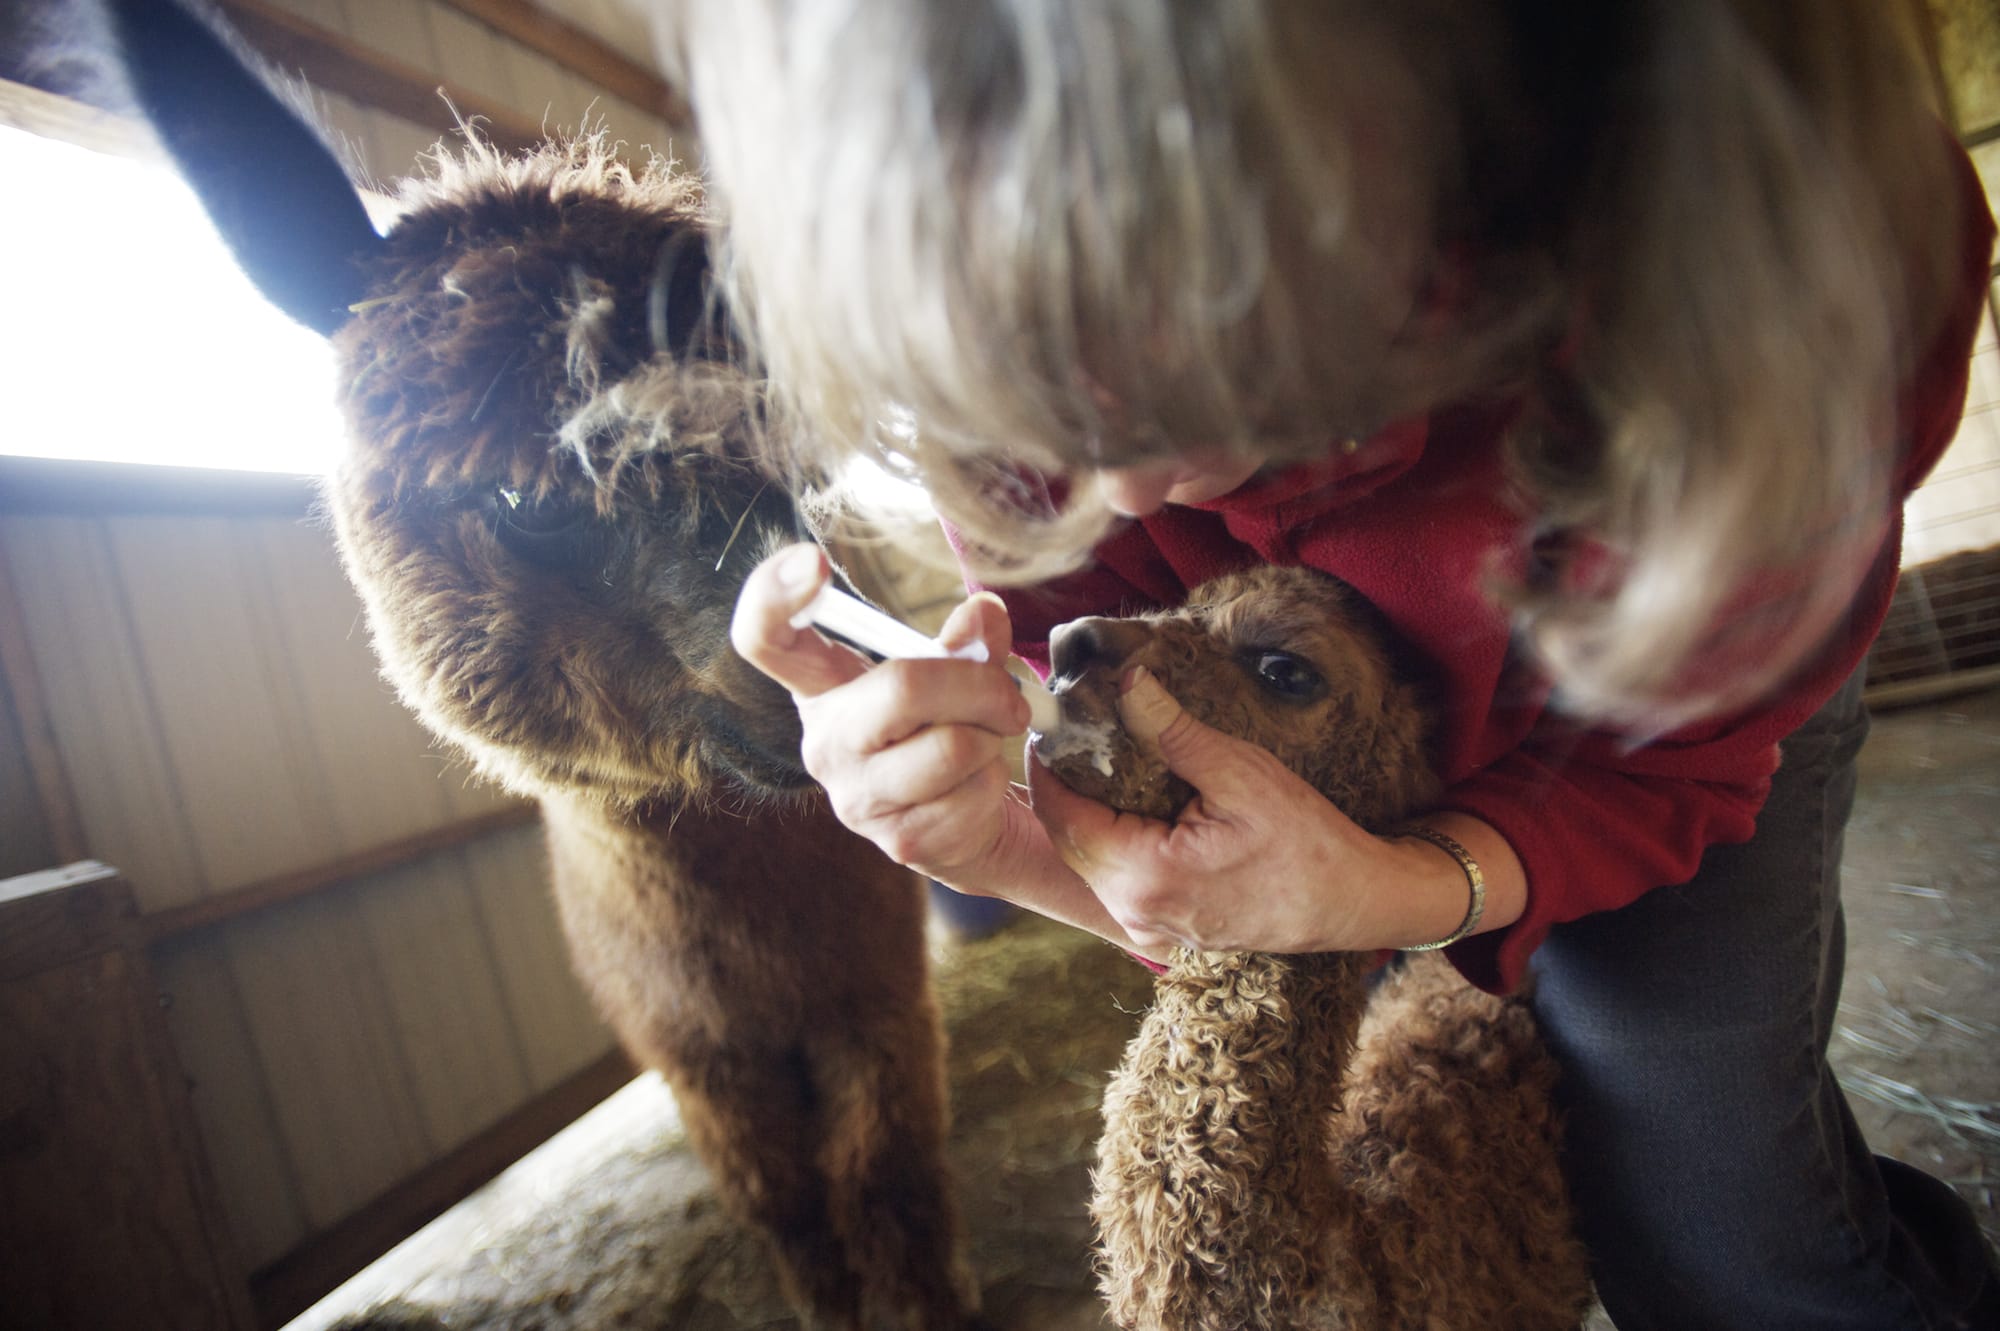 STEVEN LANE/The Columbian
Ruthie Gohl feeds a 6-hour-old alpaca. They named her Maggie.